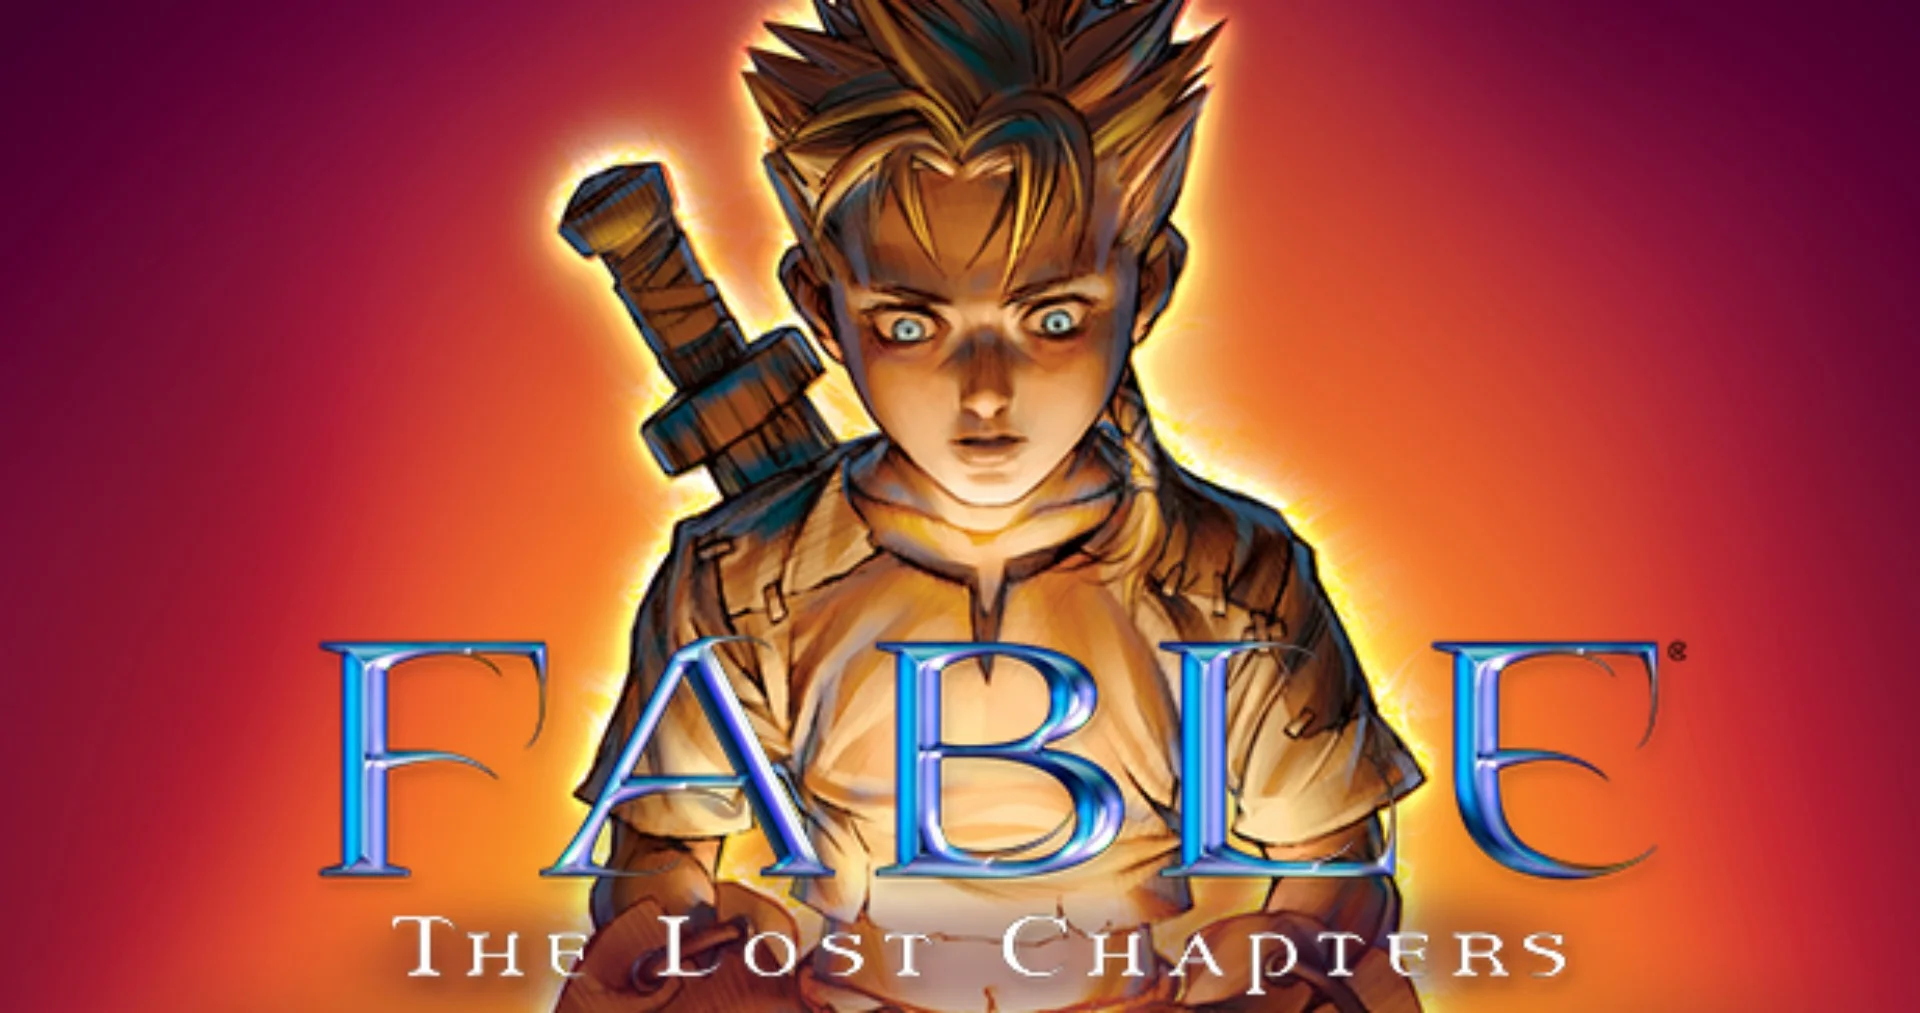 Игра Fable: The Lost Chapters